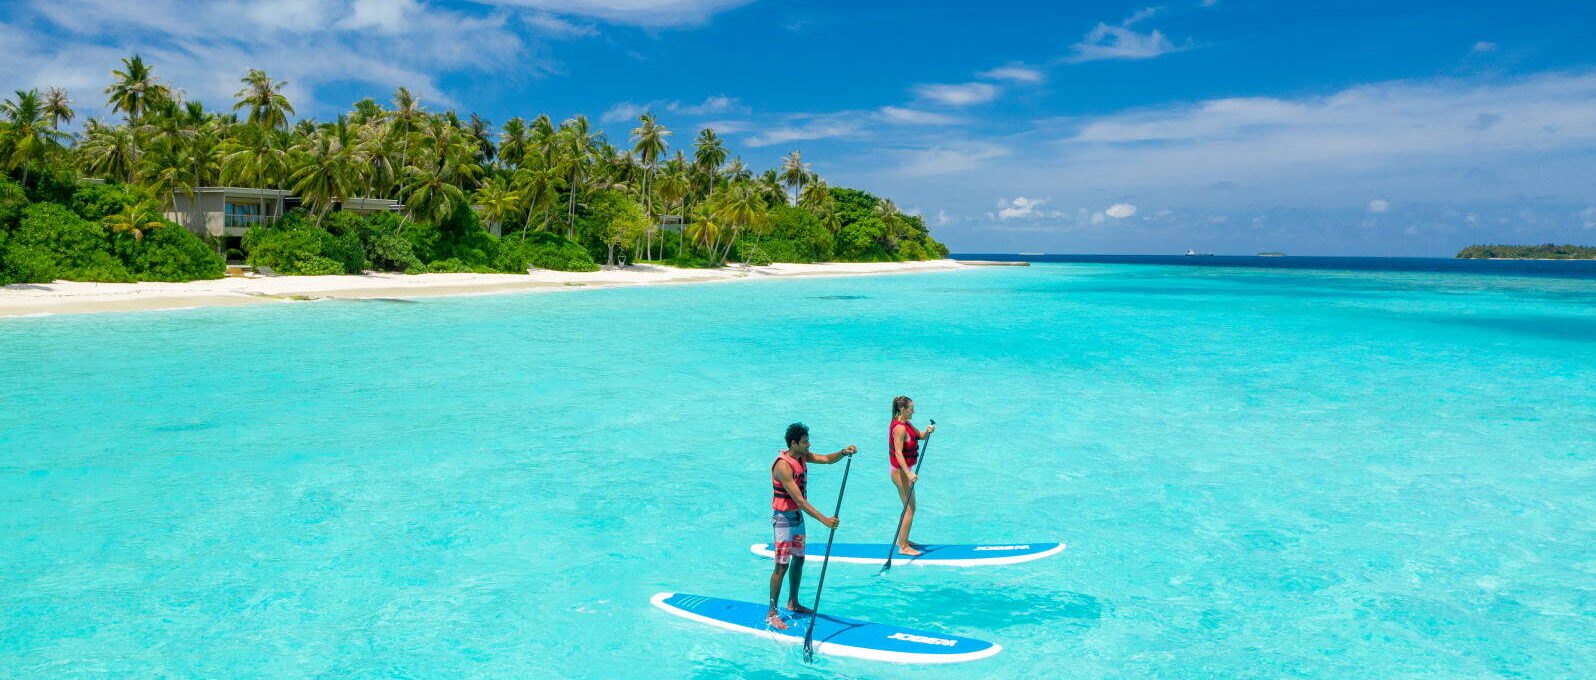 5 Reasons Summer Is the Best Time to Visit Amilla Maldives